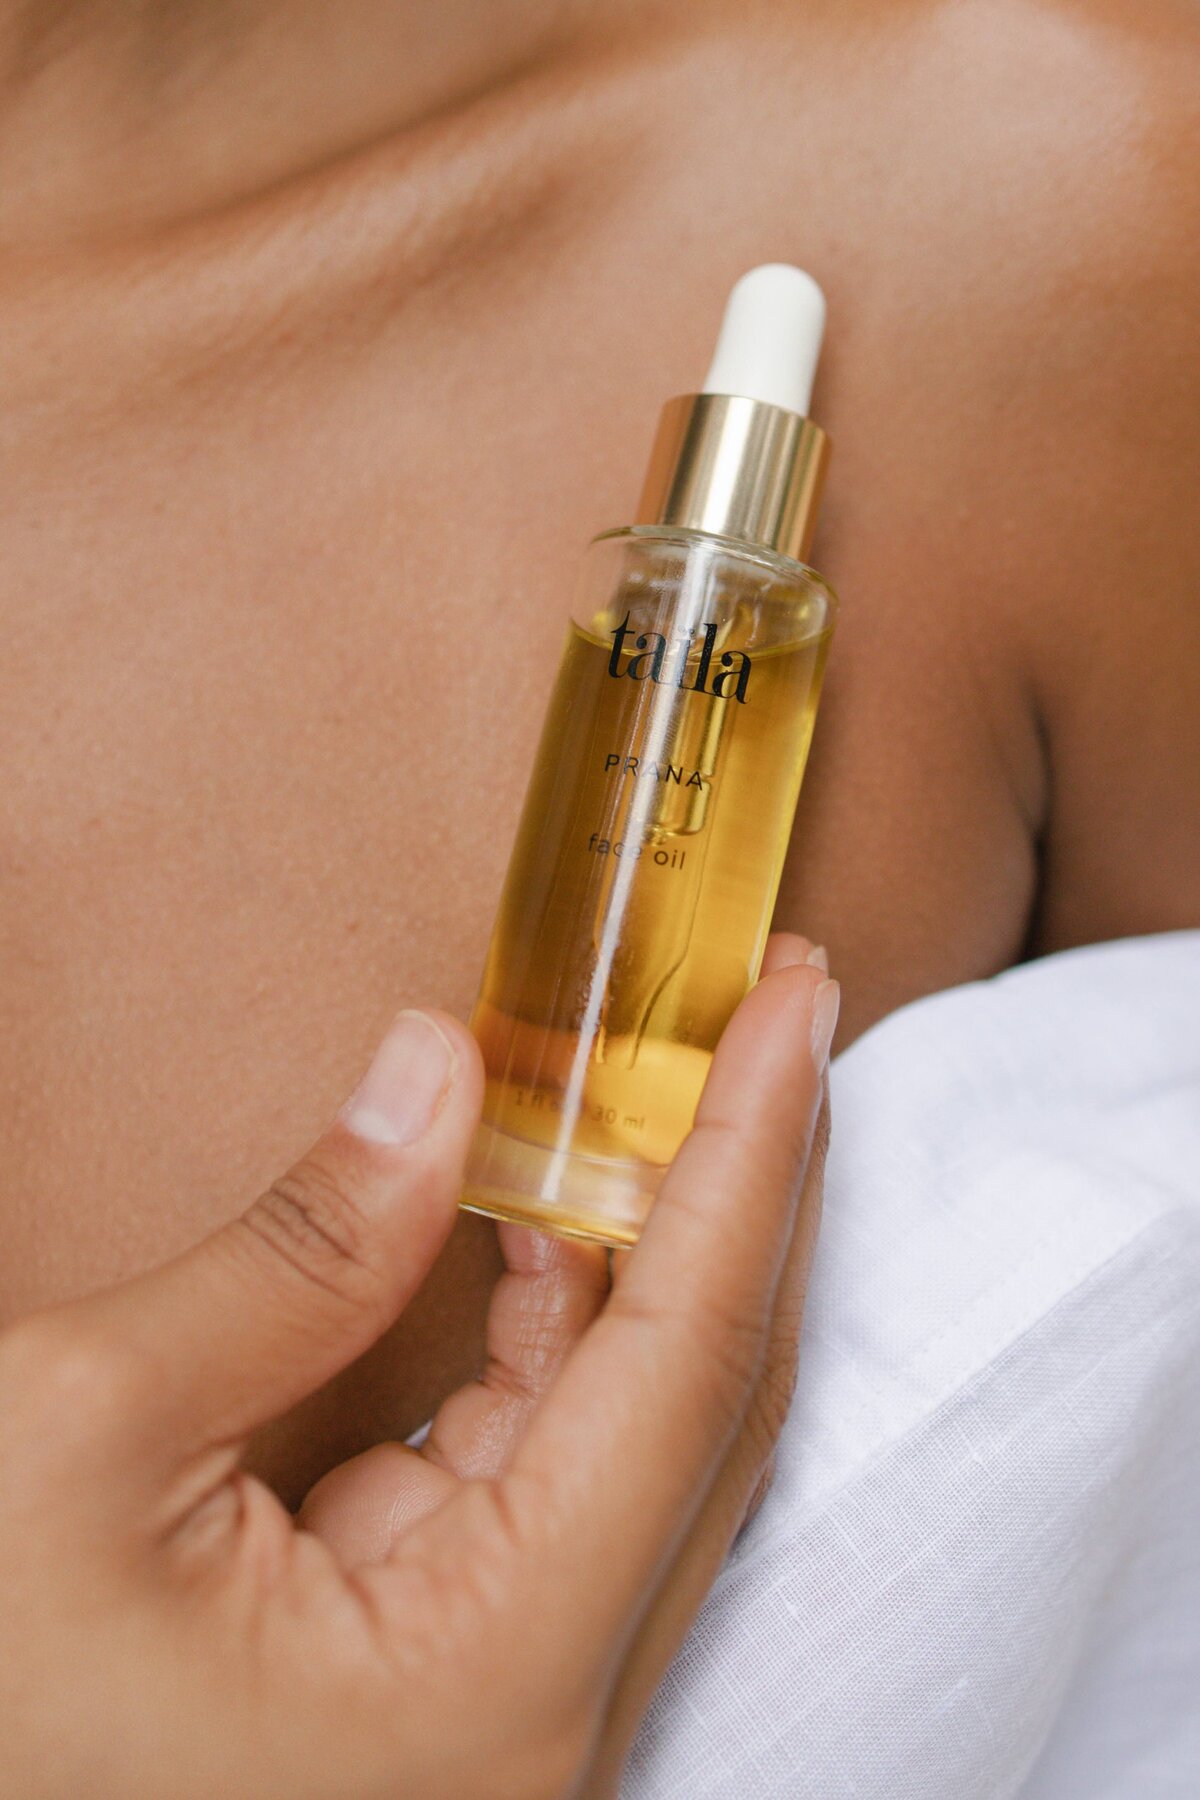 Ayurvedic Facial Oil by Taila Skincare Photoshoot by Alex Perry Photographer for Skincare Brands 